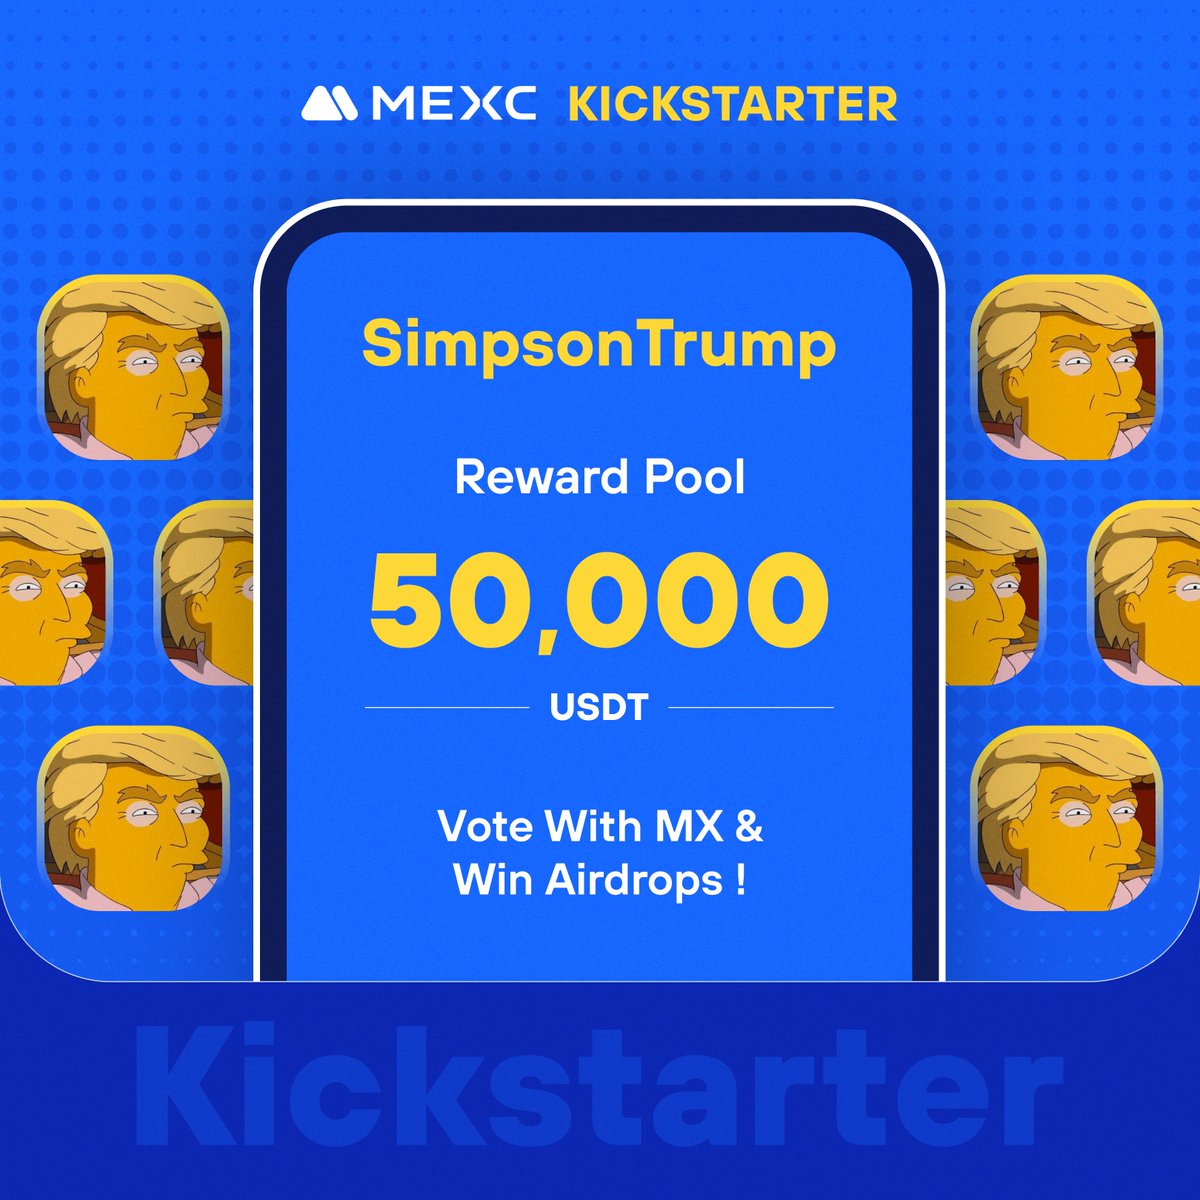 .@Simpson_TRUMP, a meme coin on the Ethereum chain, is coming to #MEXCKickstarter 🚀 🗳Vote with $MX to share massive airdrops 📈 #SIMPSONTRUMP/USDT Trading: 2024-05-21 15:00 (UTC) Details: mexc.com/support/articl…